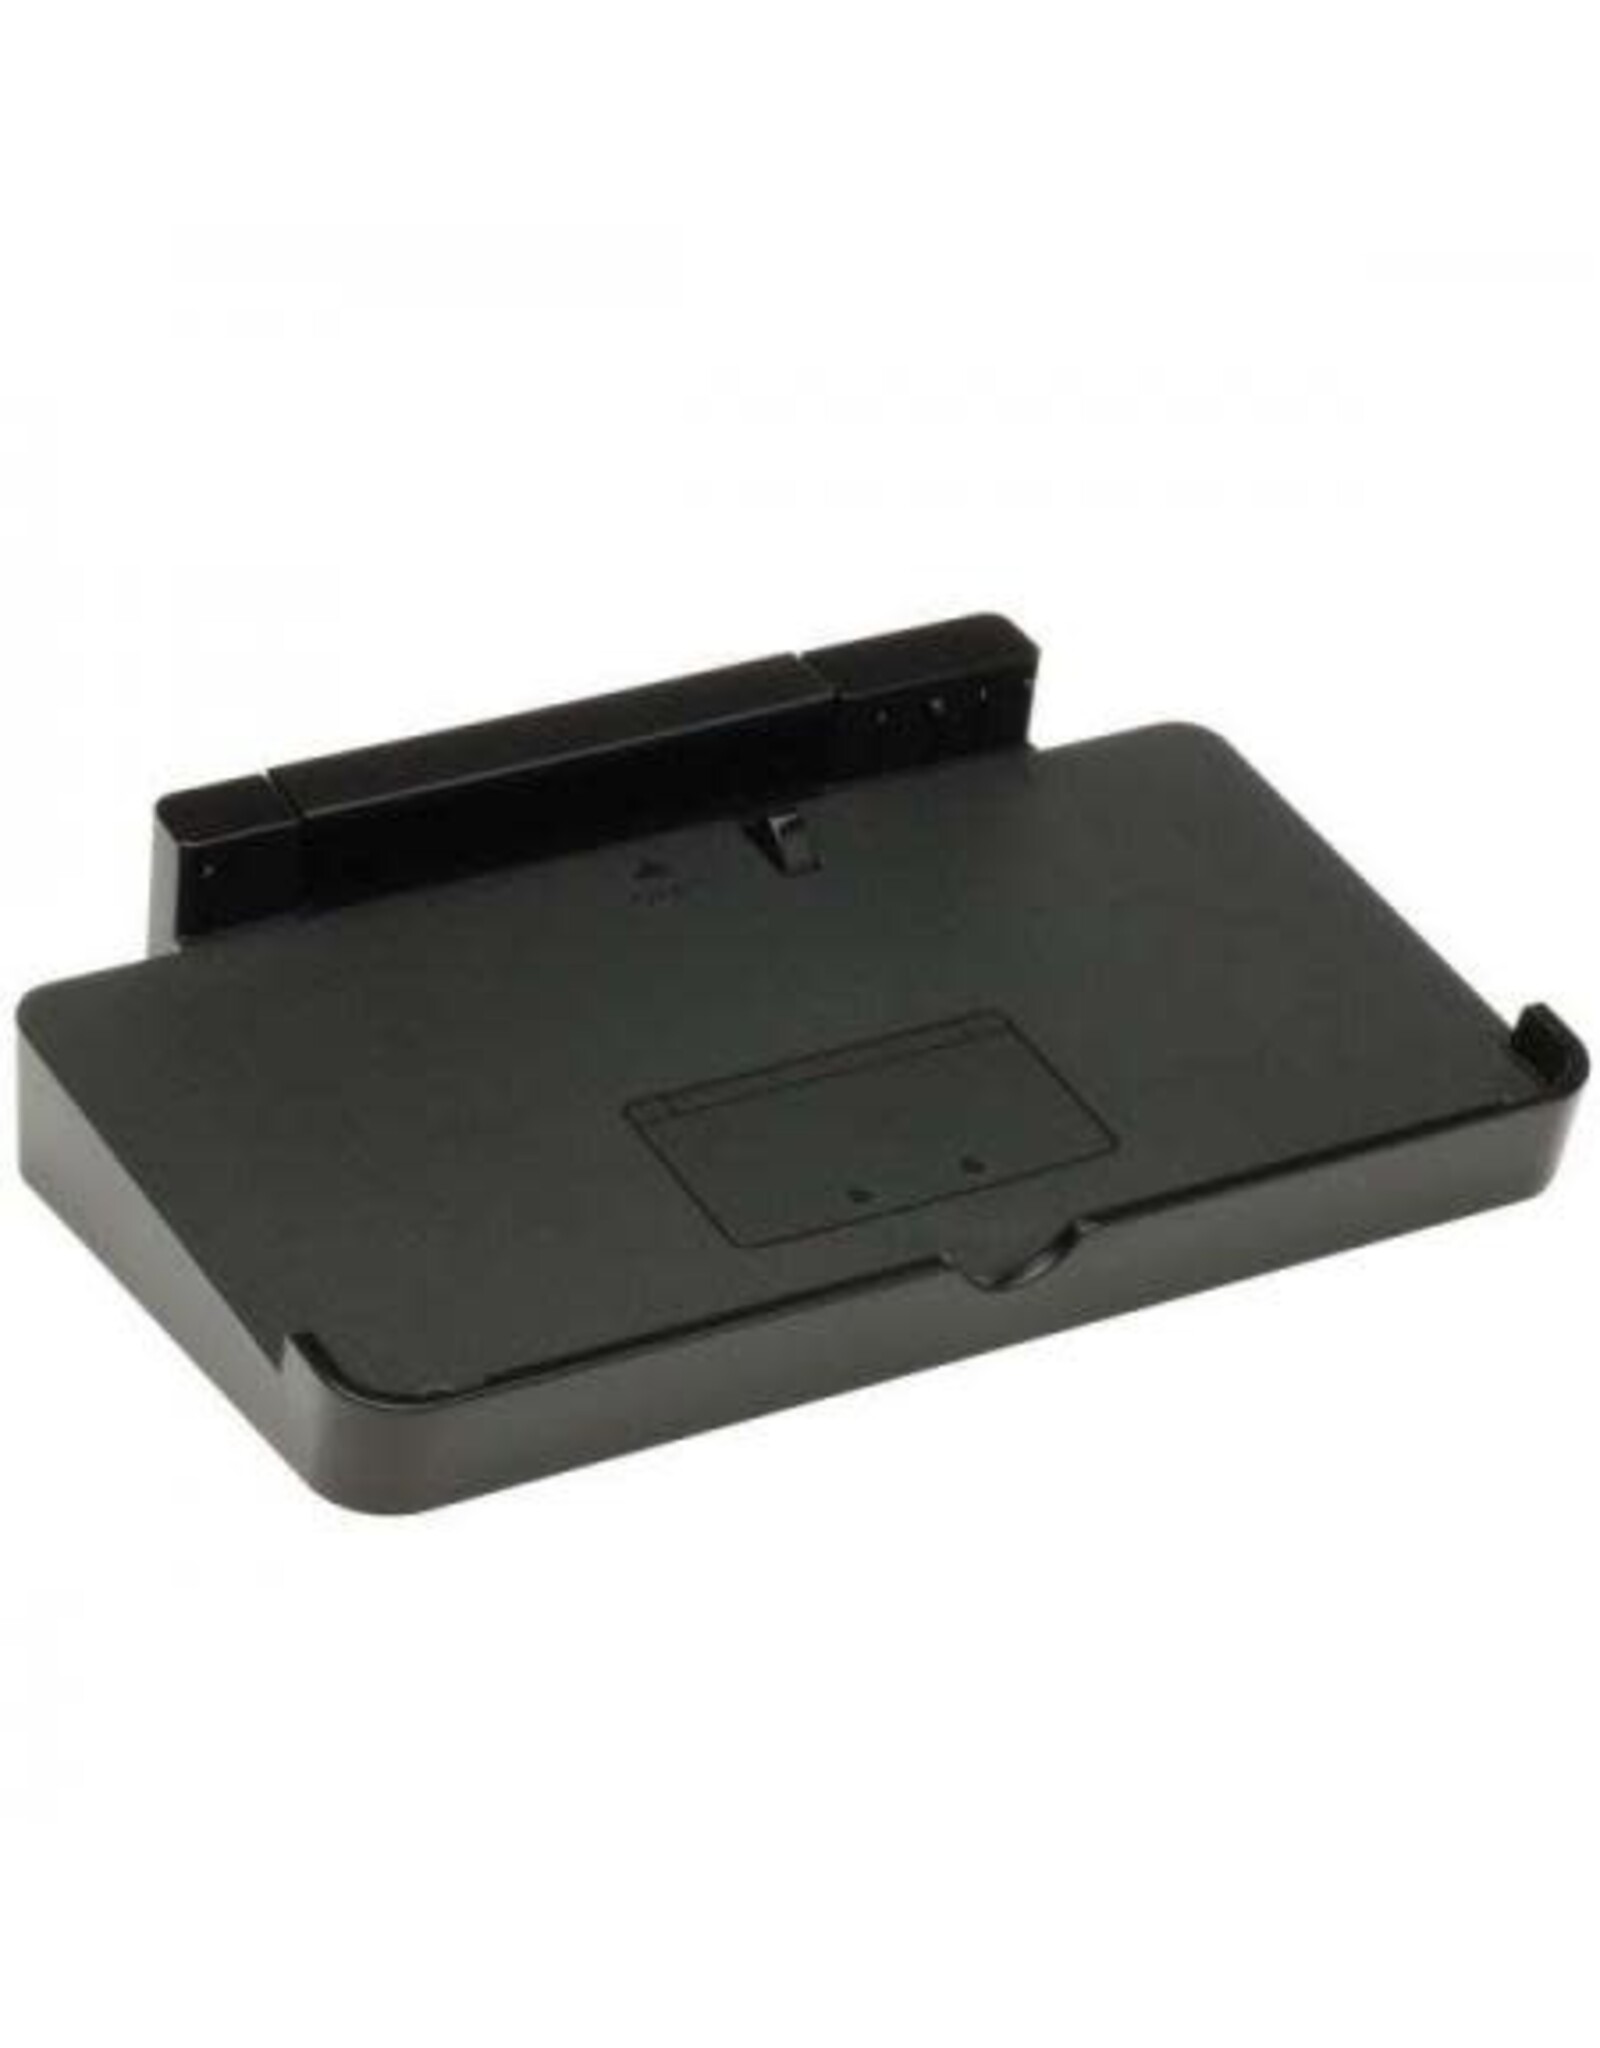 Nintendo 3DS Nintendo 3DS Charge Dock (OEM, Used)